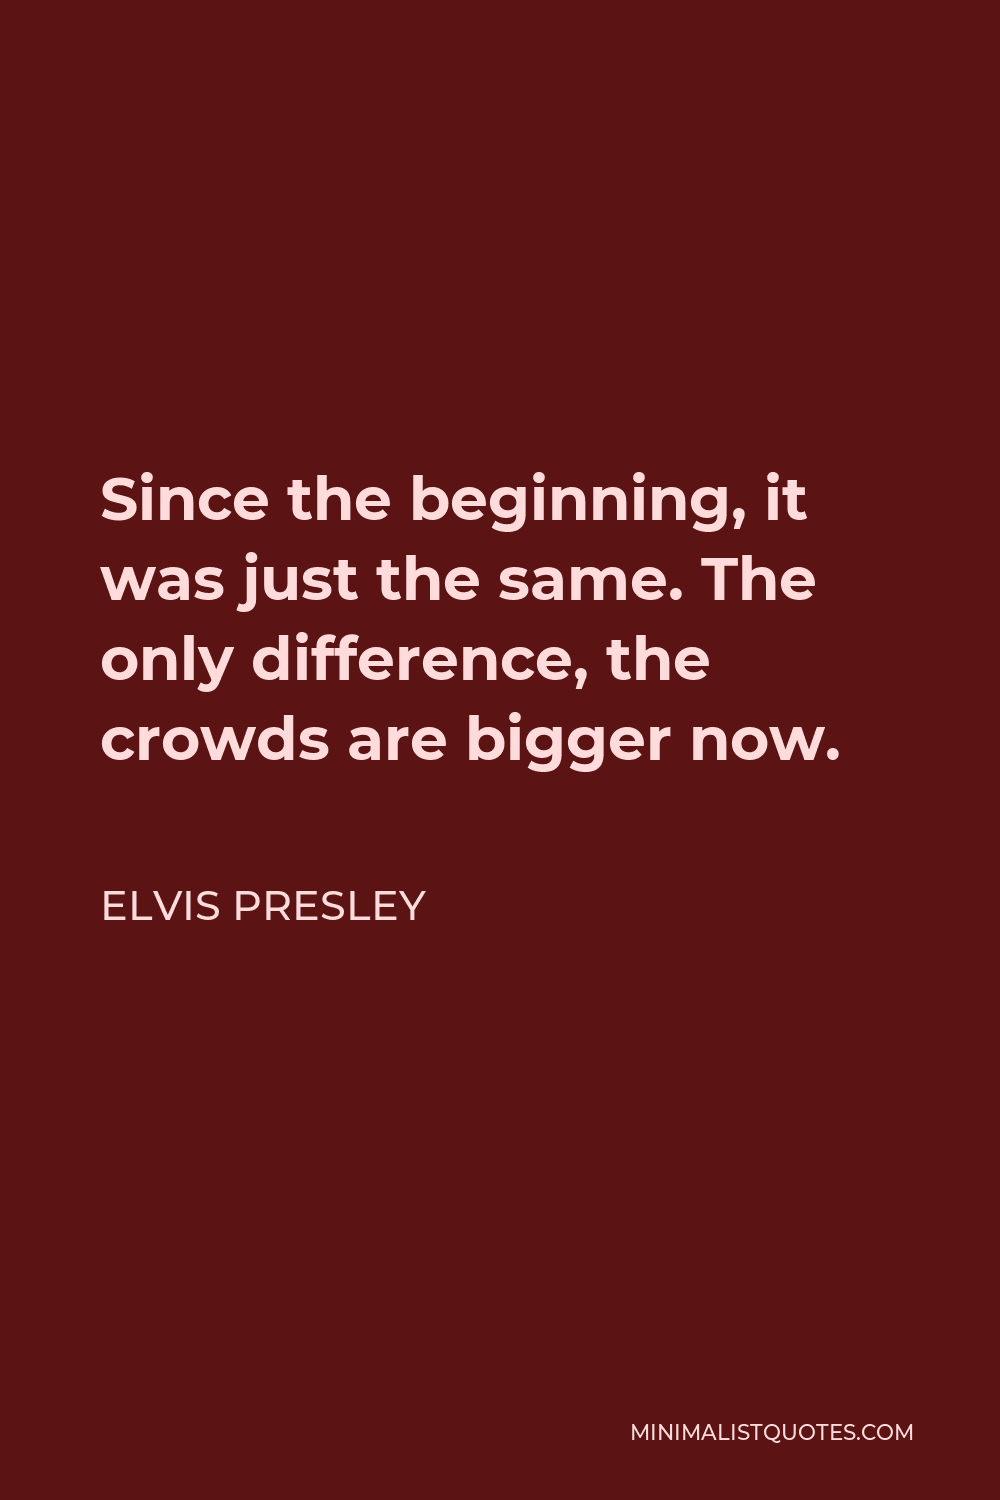 Elvis Presley Quote - Since the beginning, it was just the same. The only difference, the crowds are bigger now.